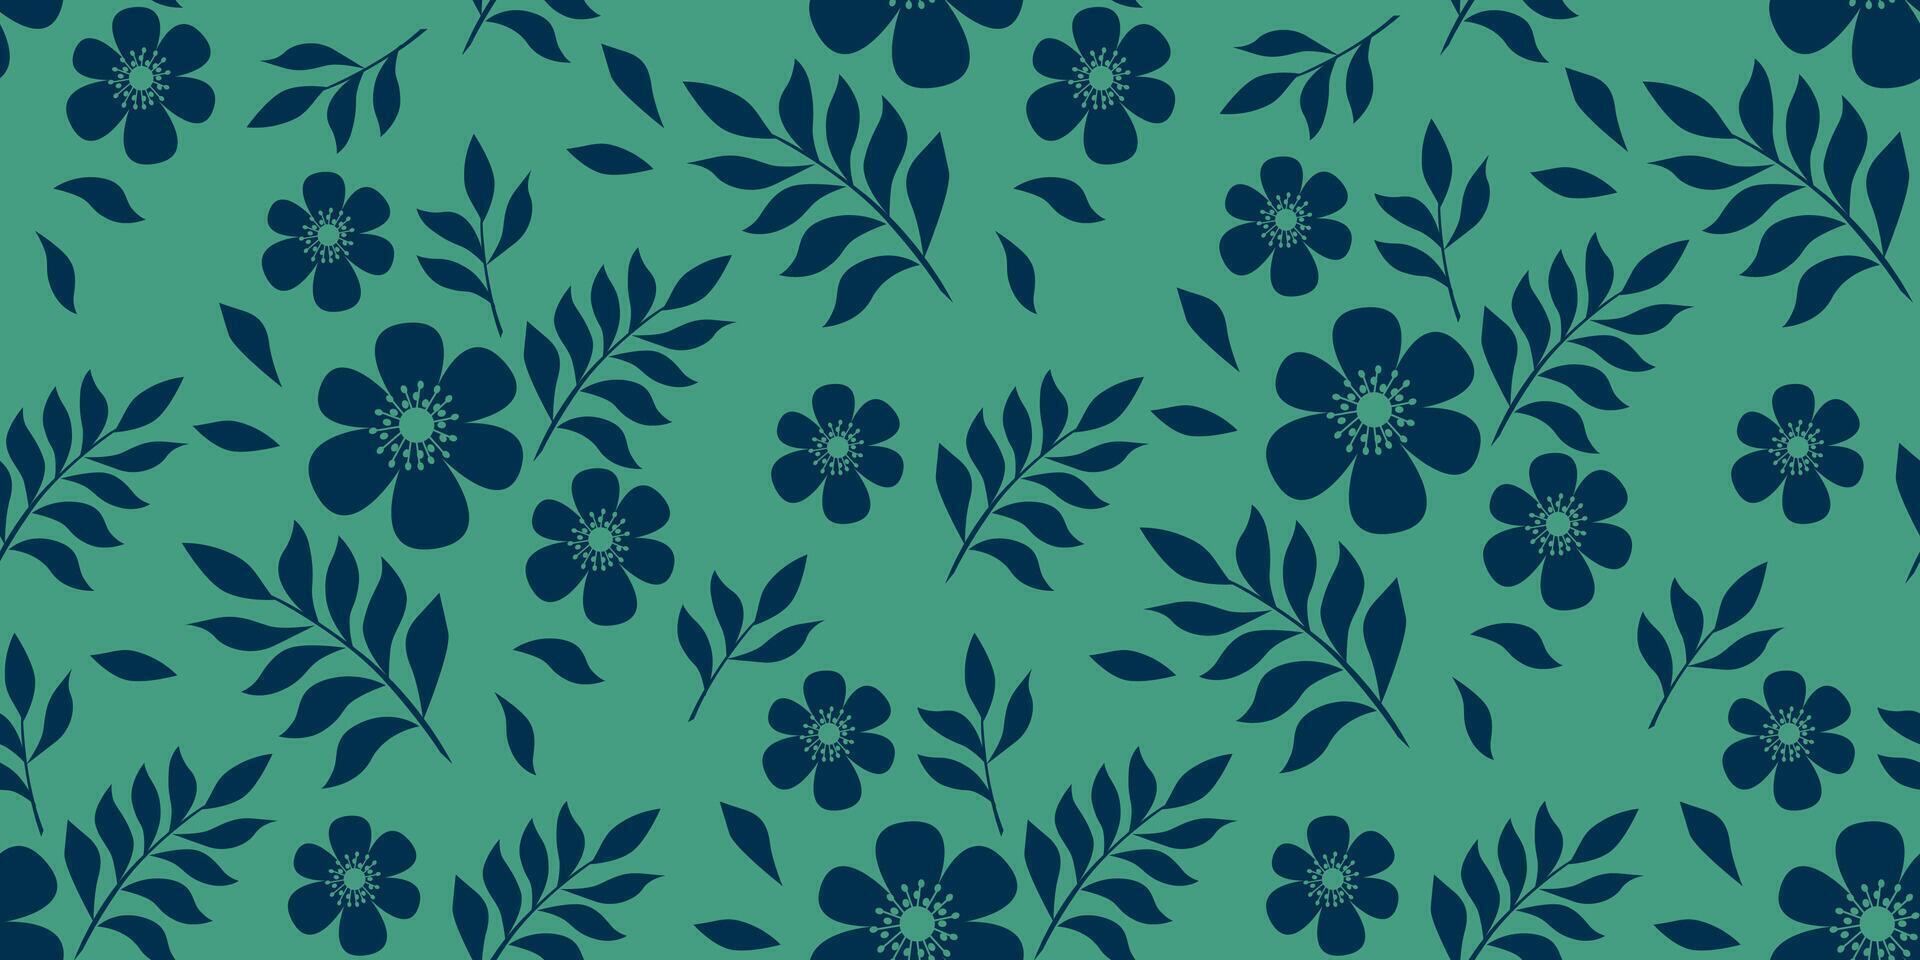 Seamless vector pattern in Asian style in trendy colors with silhouettes of flowers and leaves. Can be used for textiles, prints, wallpapers, backgrounds.